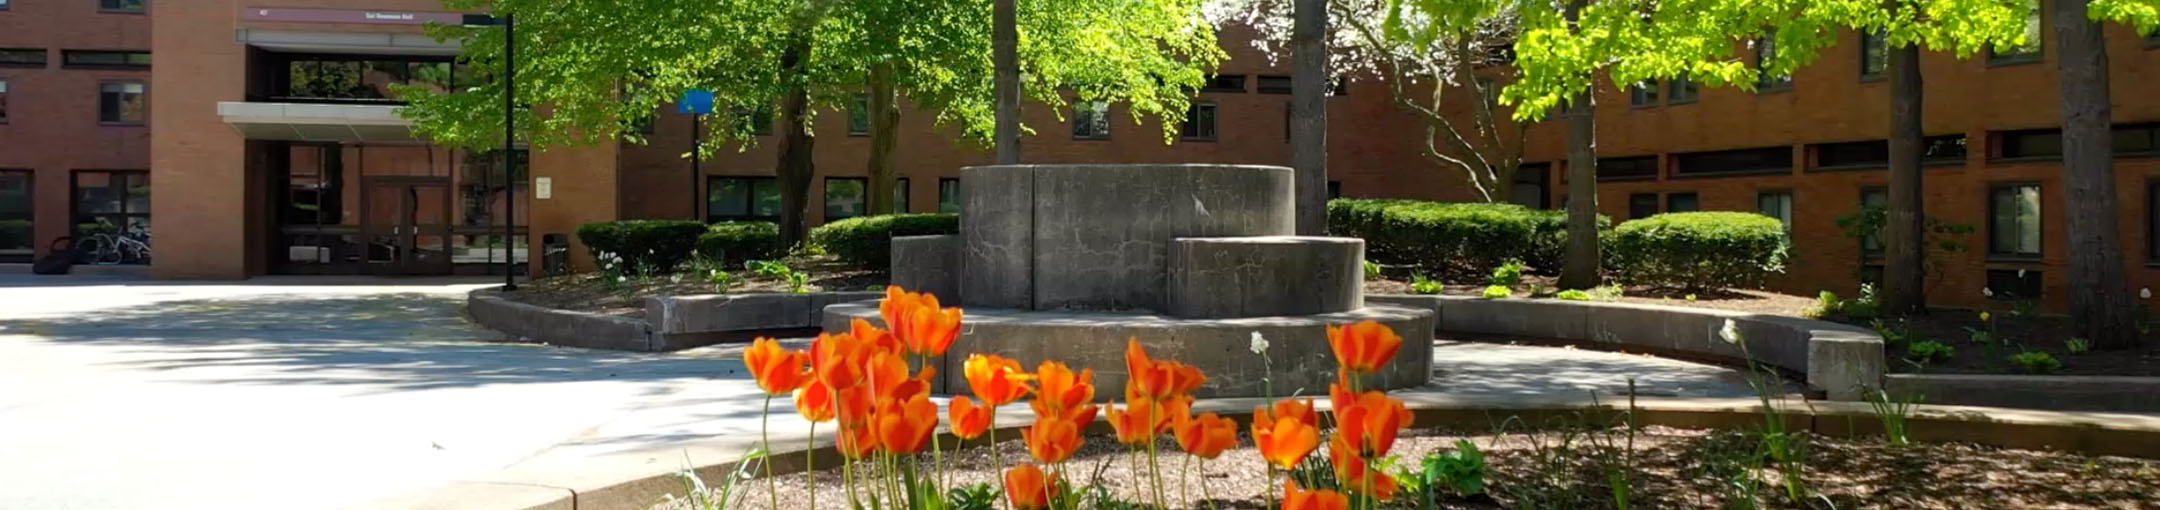 courtyard in middle of residence halls with stone sculpture and flowers